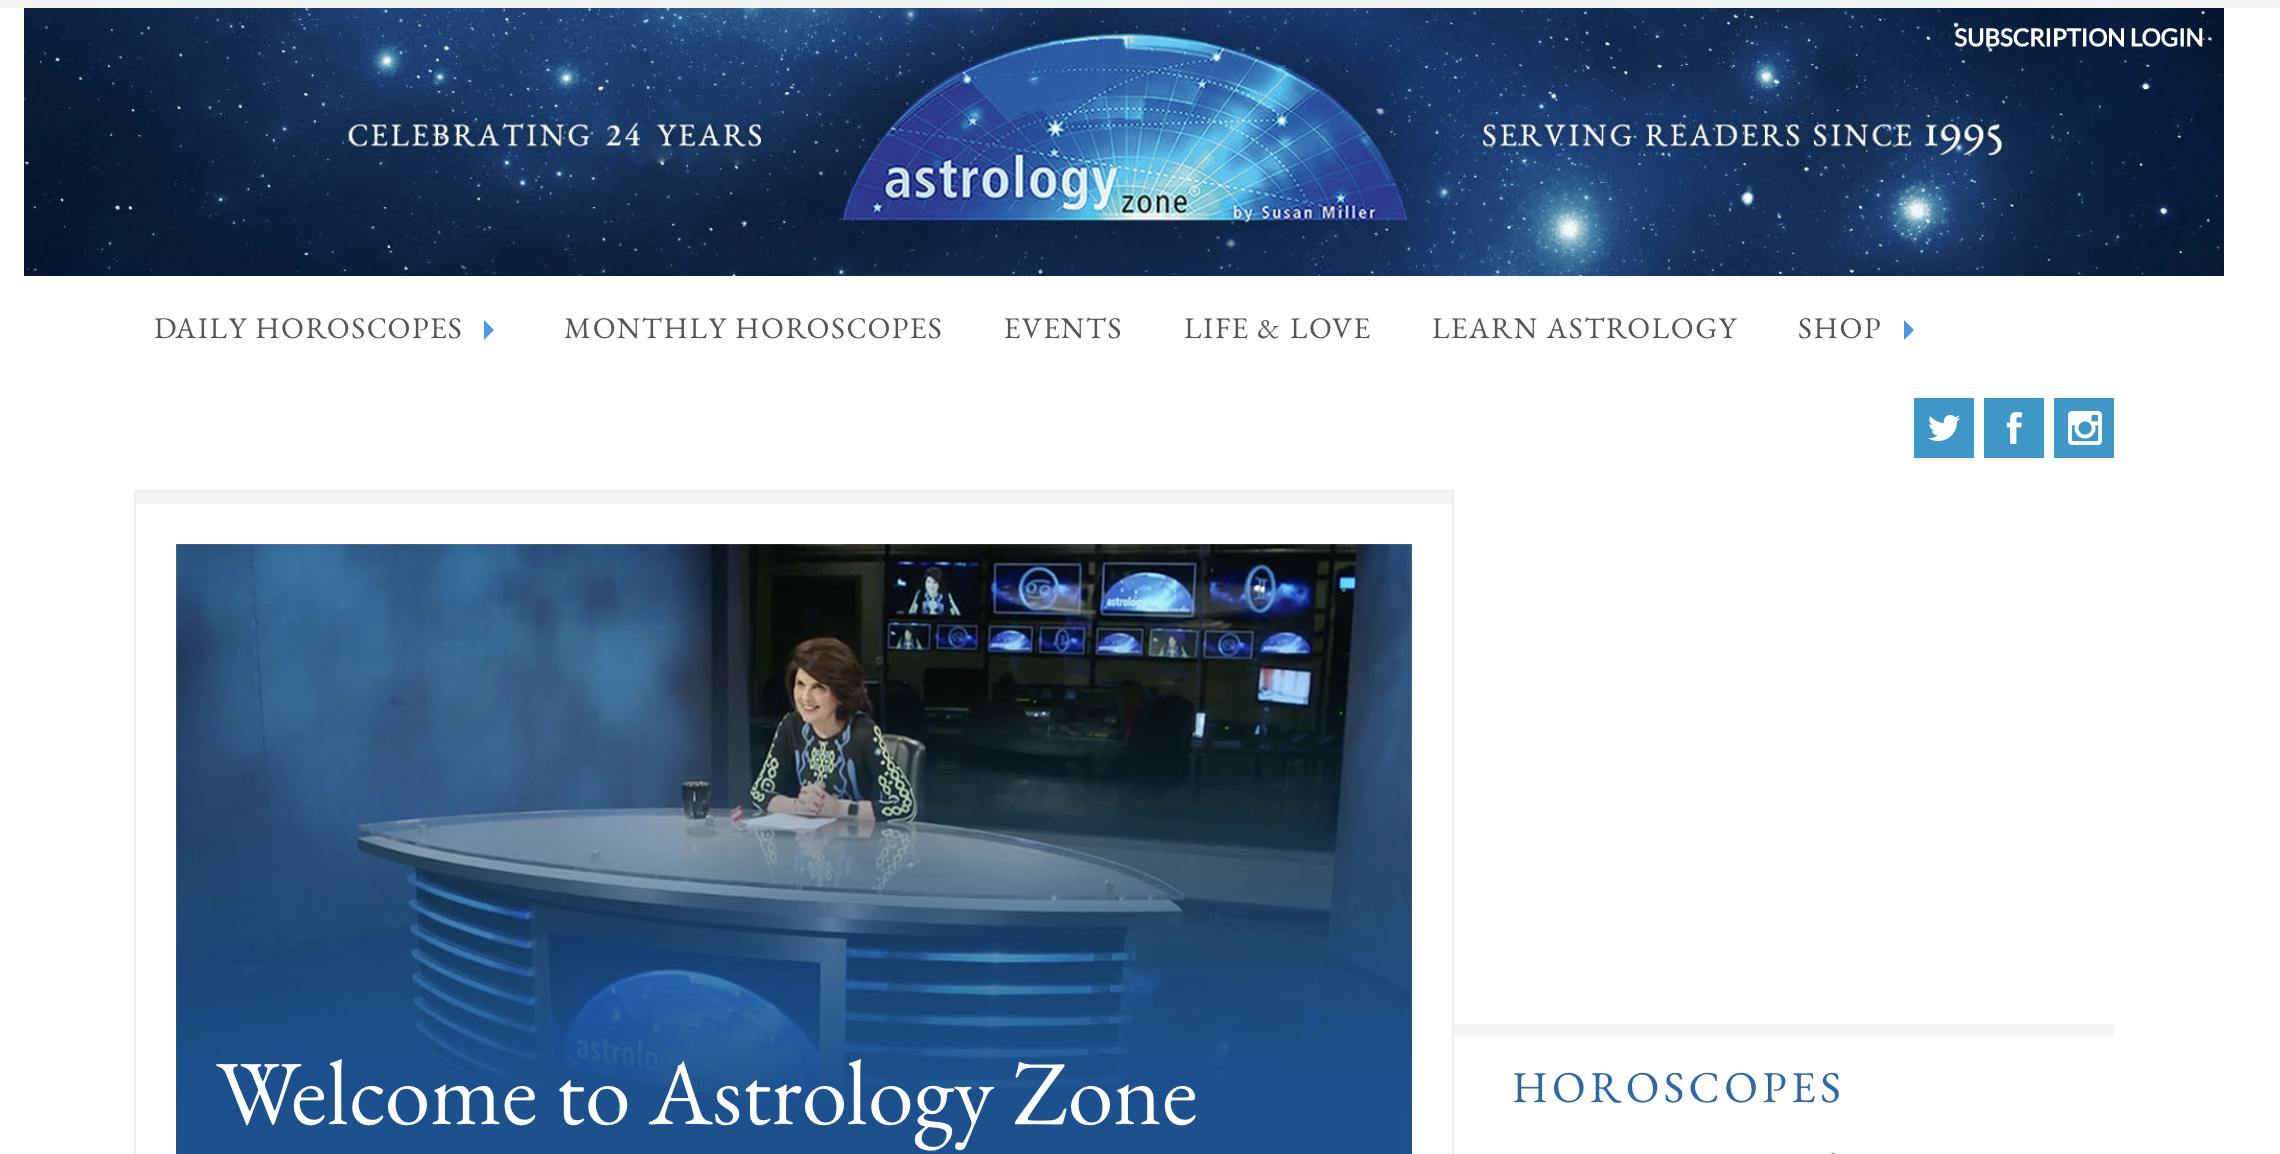 Screenshot of the AstrologyZone homepage, showcasing all the astrology reports offered on the site.